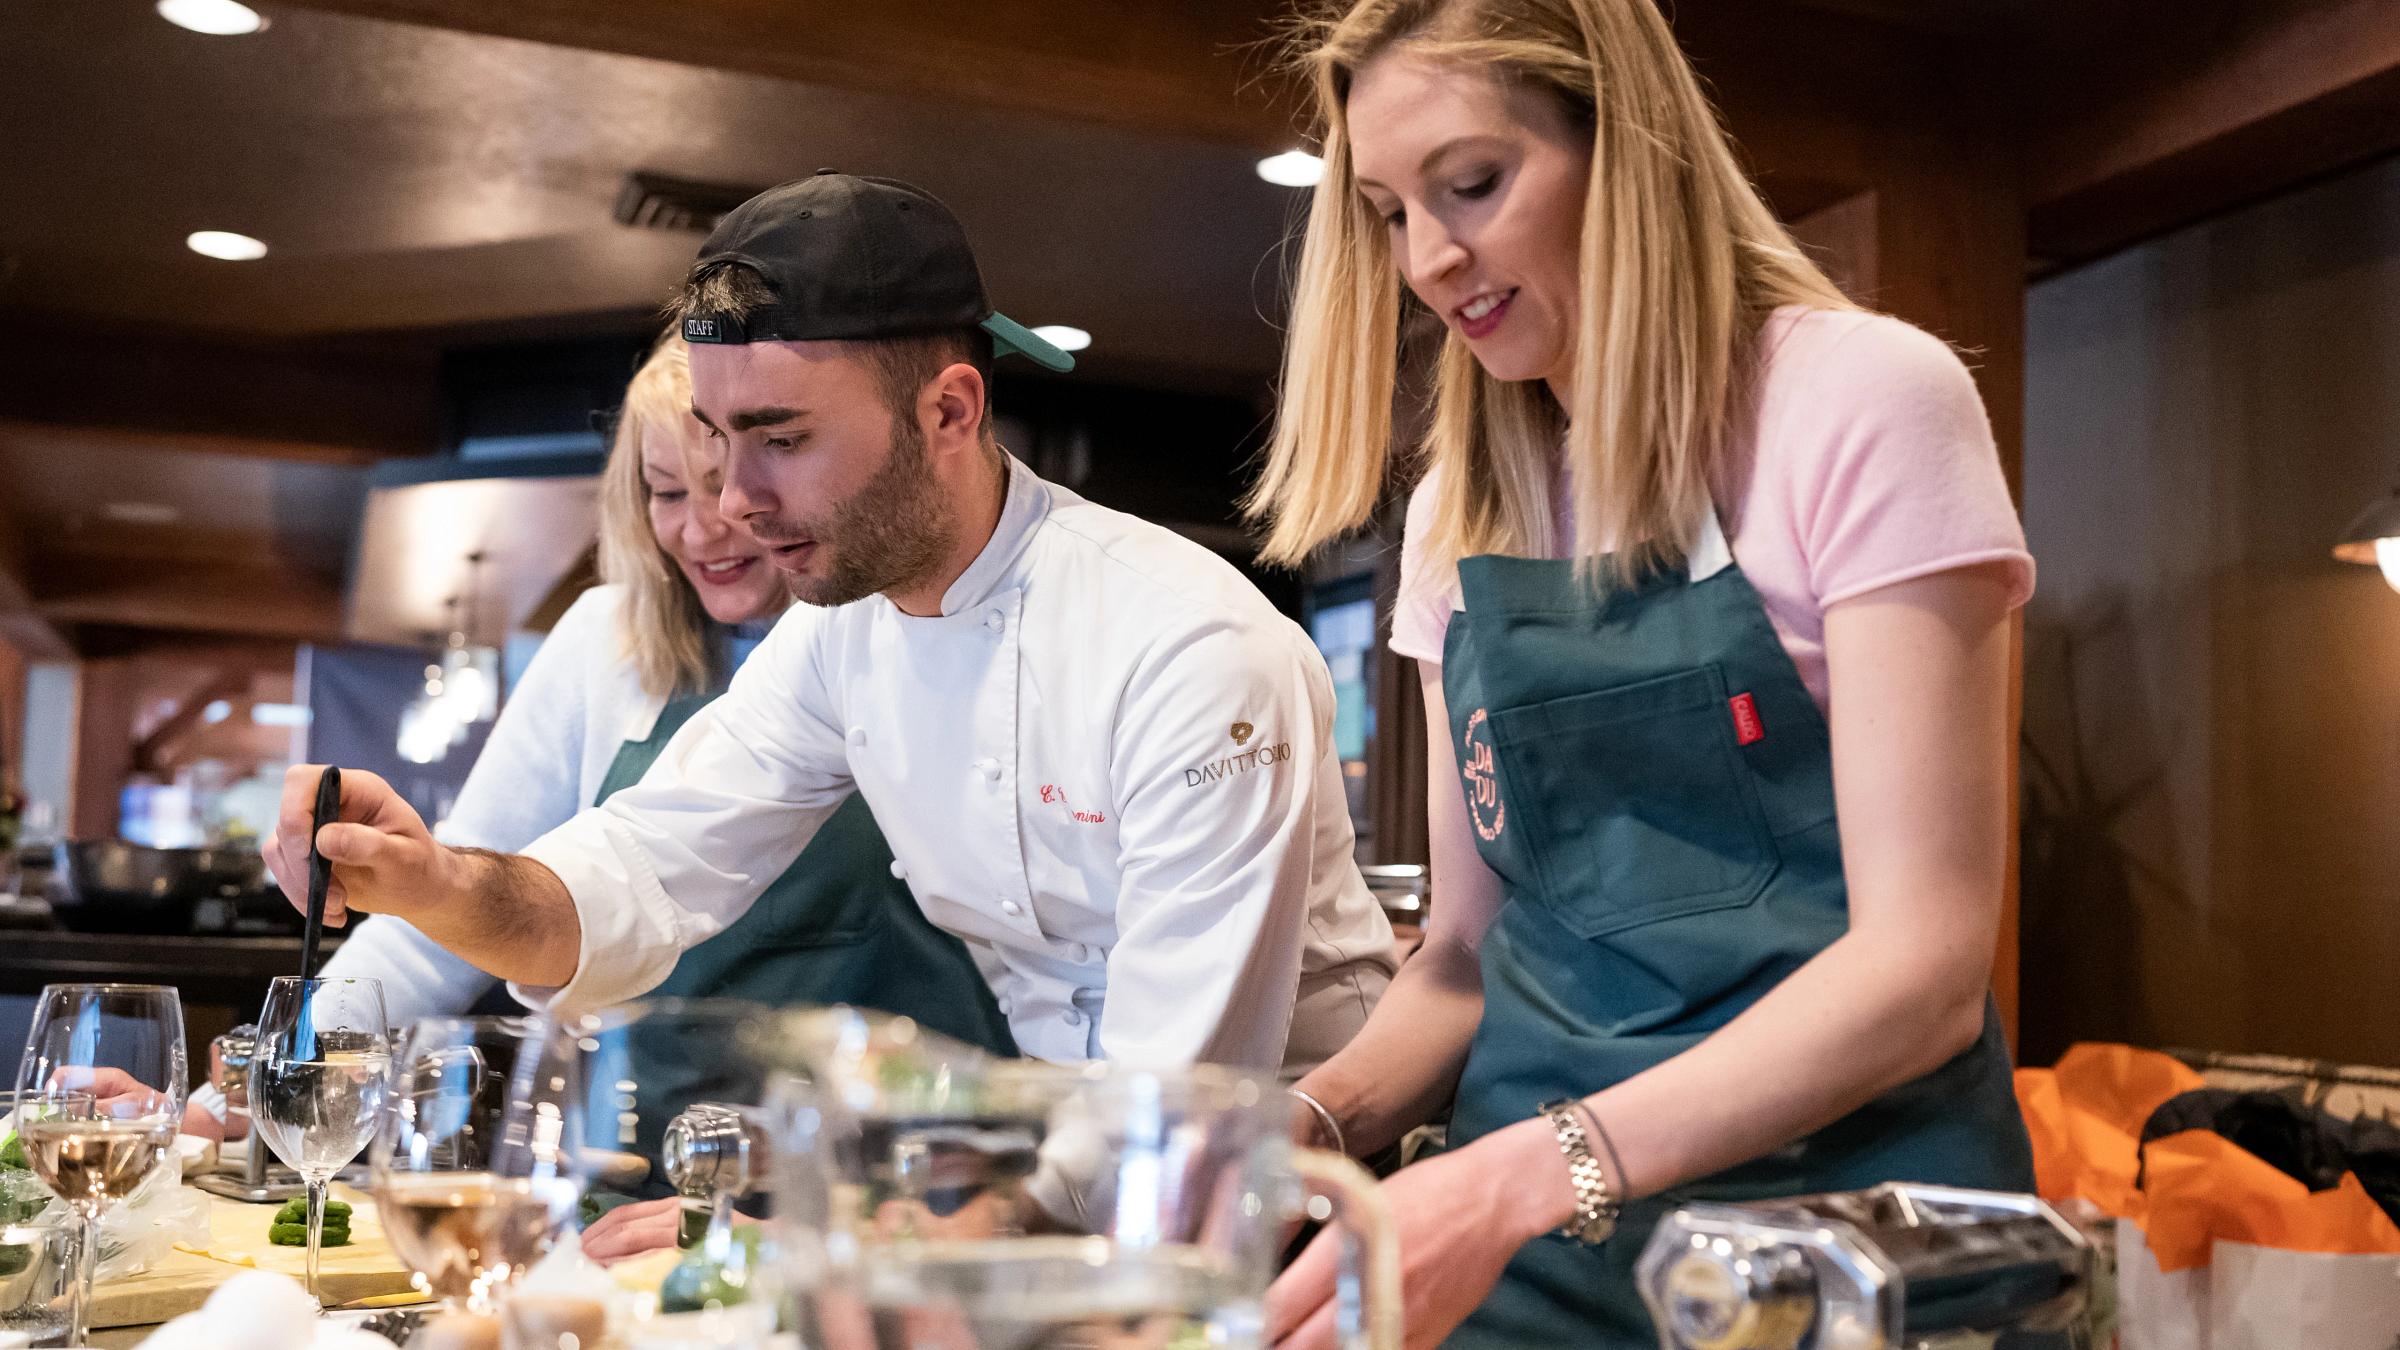 Deer Valley chef assists Taste of Luxury guests during cooking class